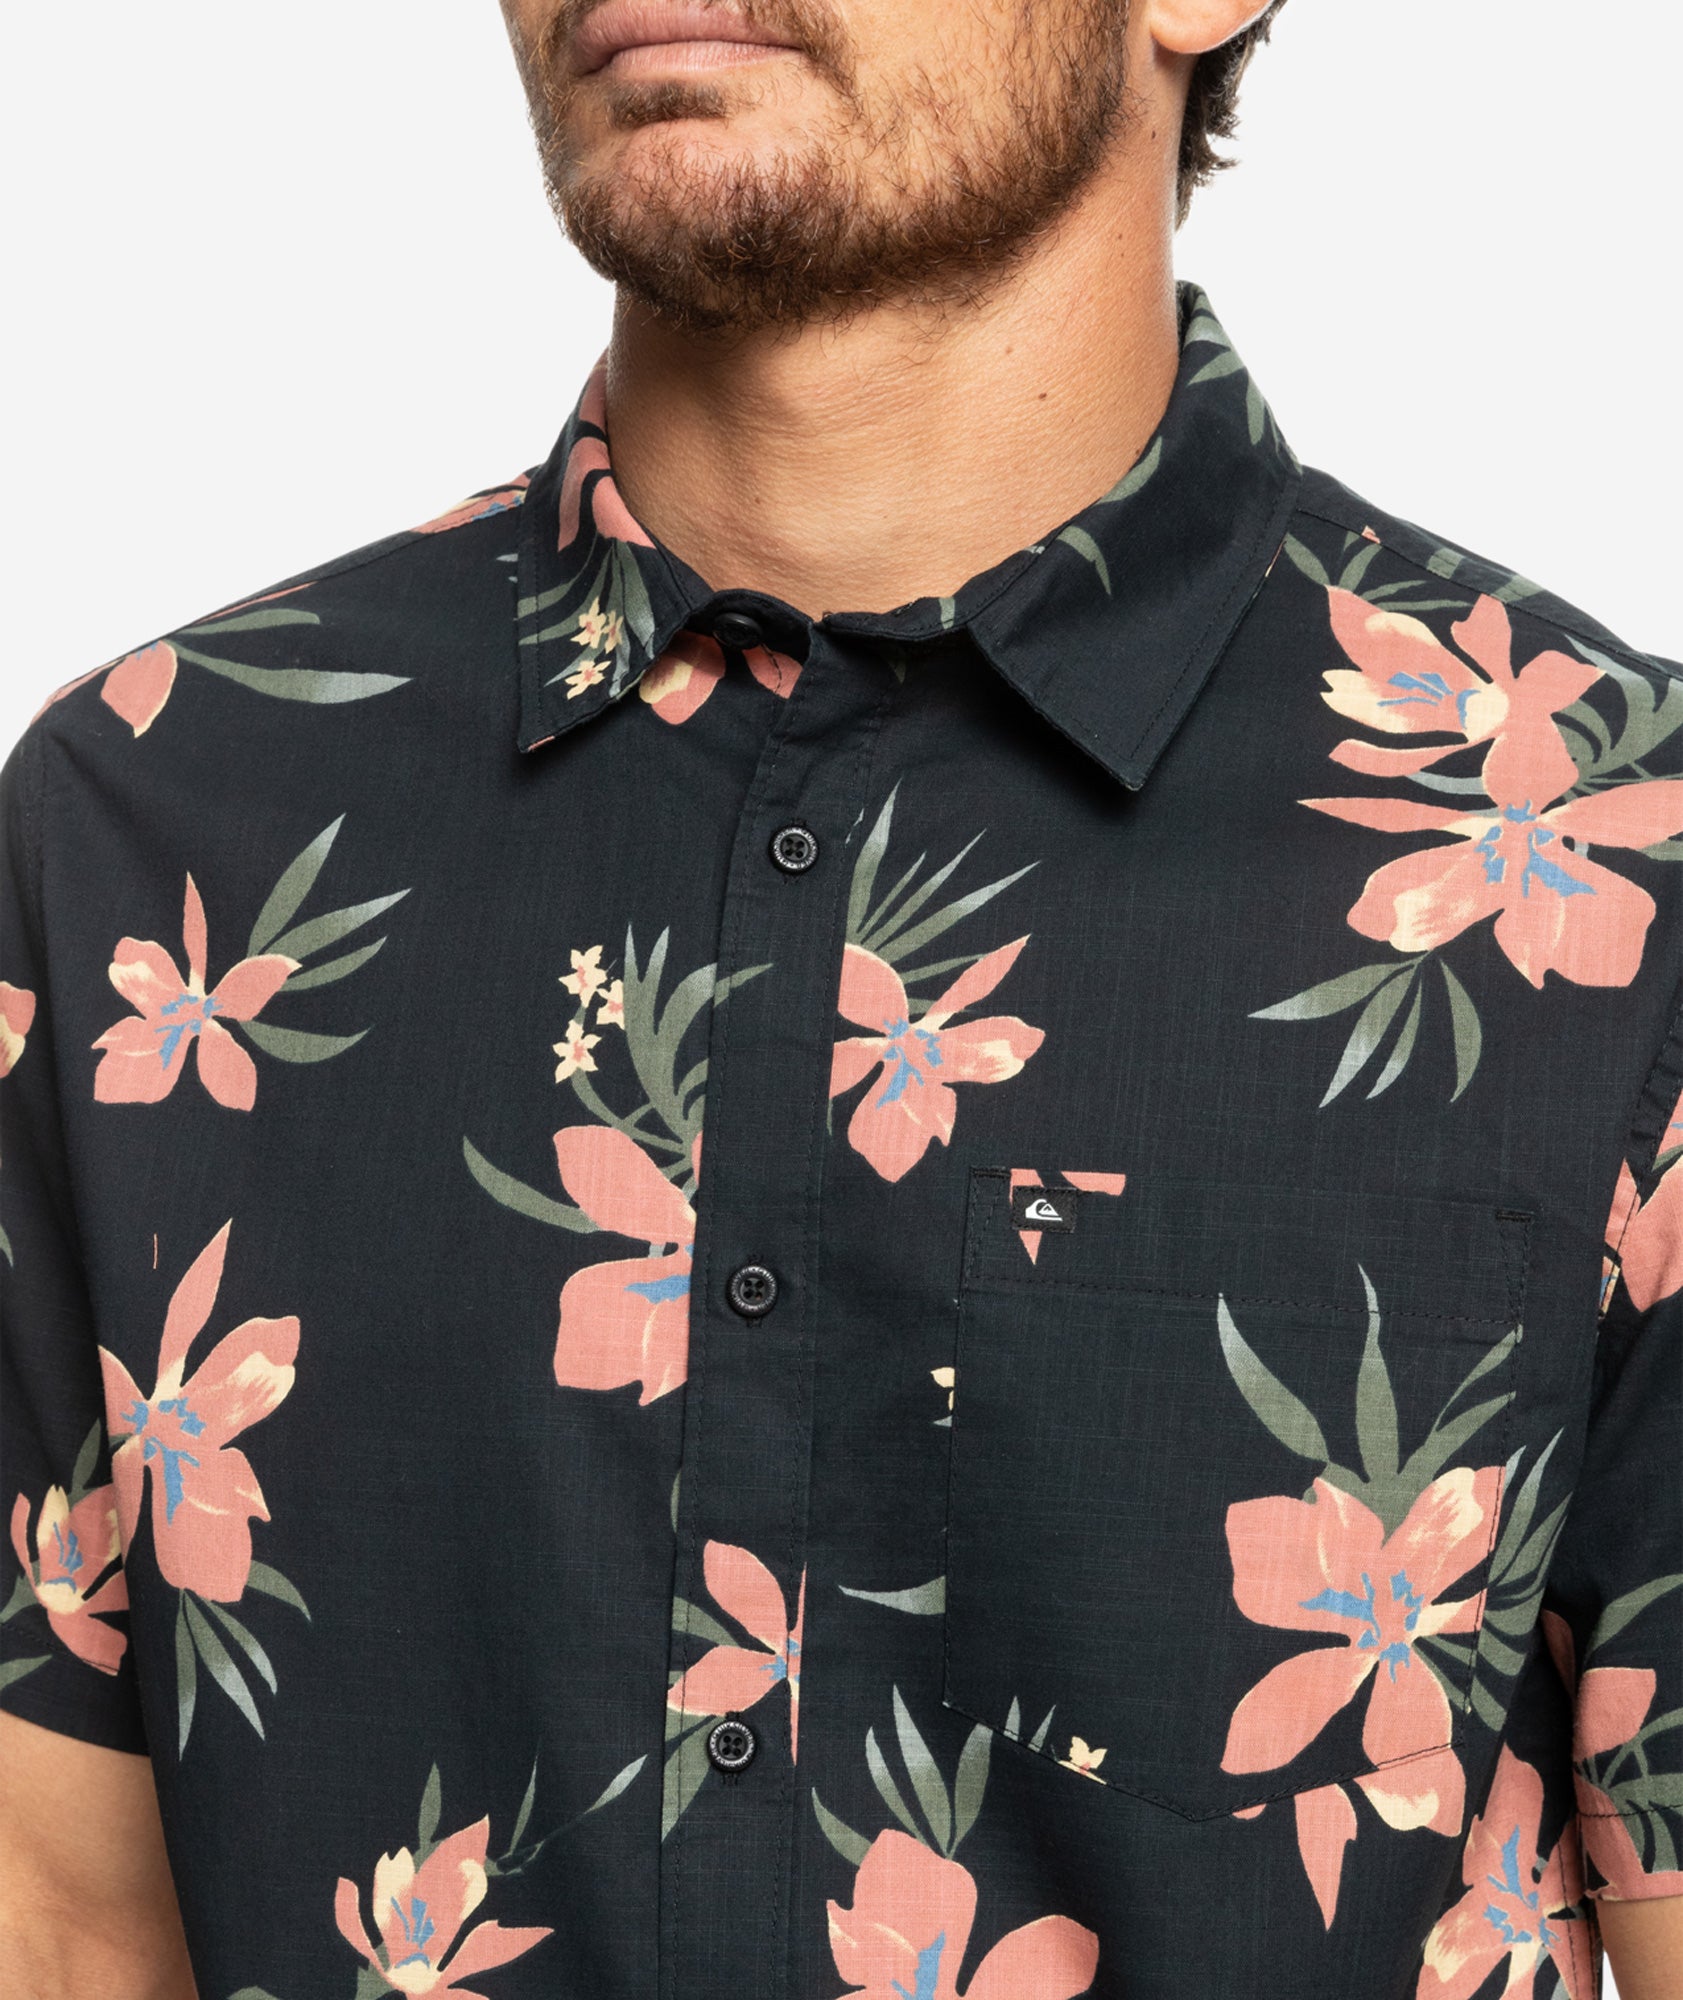 Island life is the best life. But if your zip code has you in a far off destination, let the Holidazed woven shirt keep you dreaming. An eco-conscious fabric combines with a tropical print and a garment wash for total comfort.